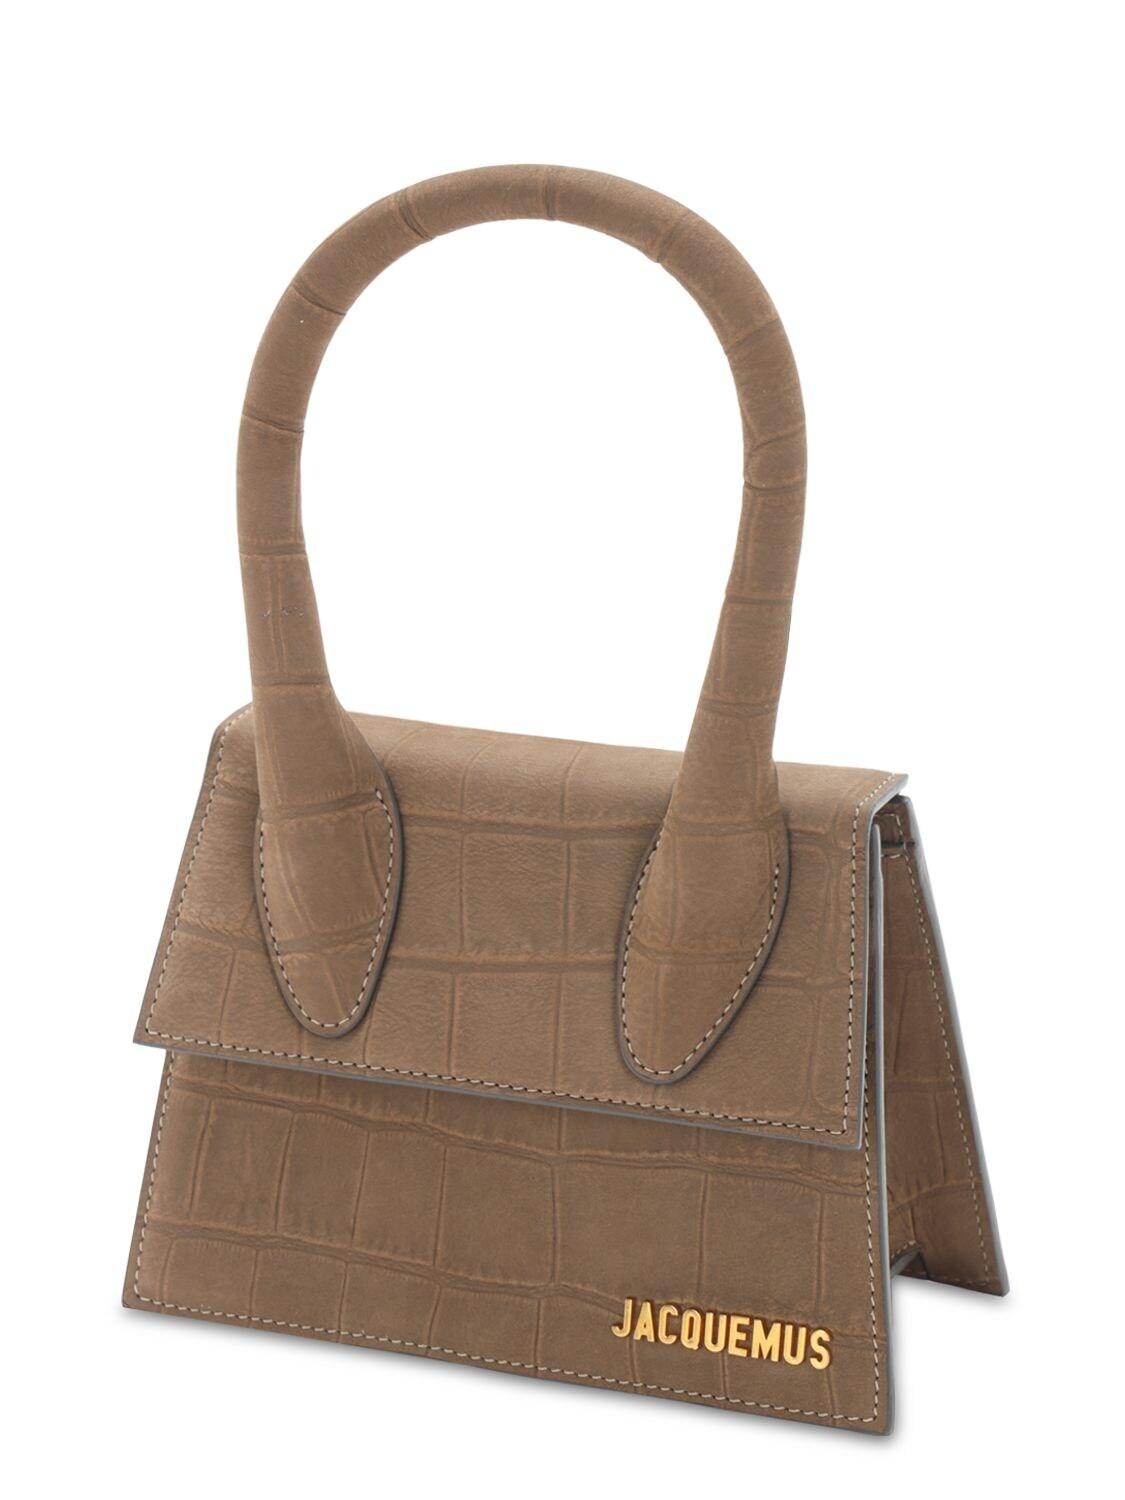 Jacquemus Le Chiquito Moyen Croc Embossed Bag in Natural | Lyst